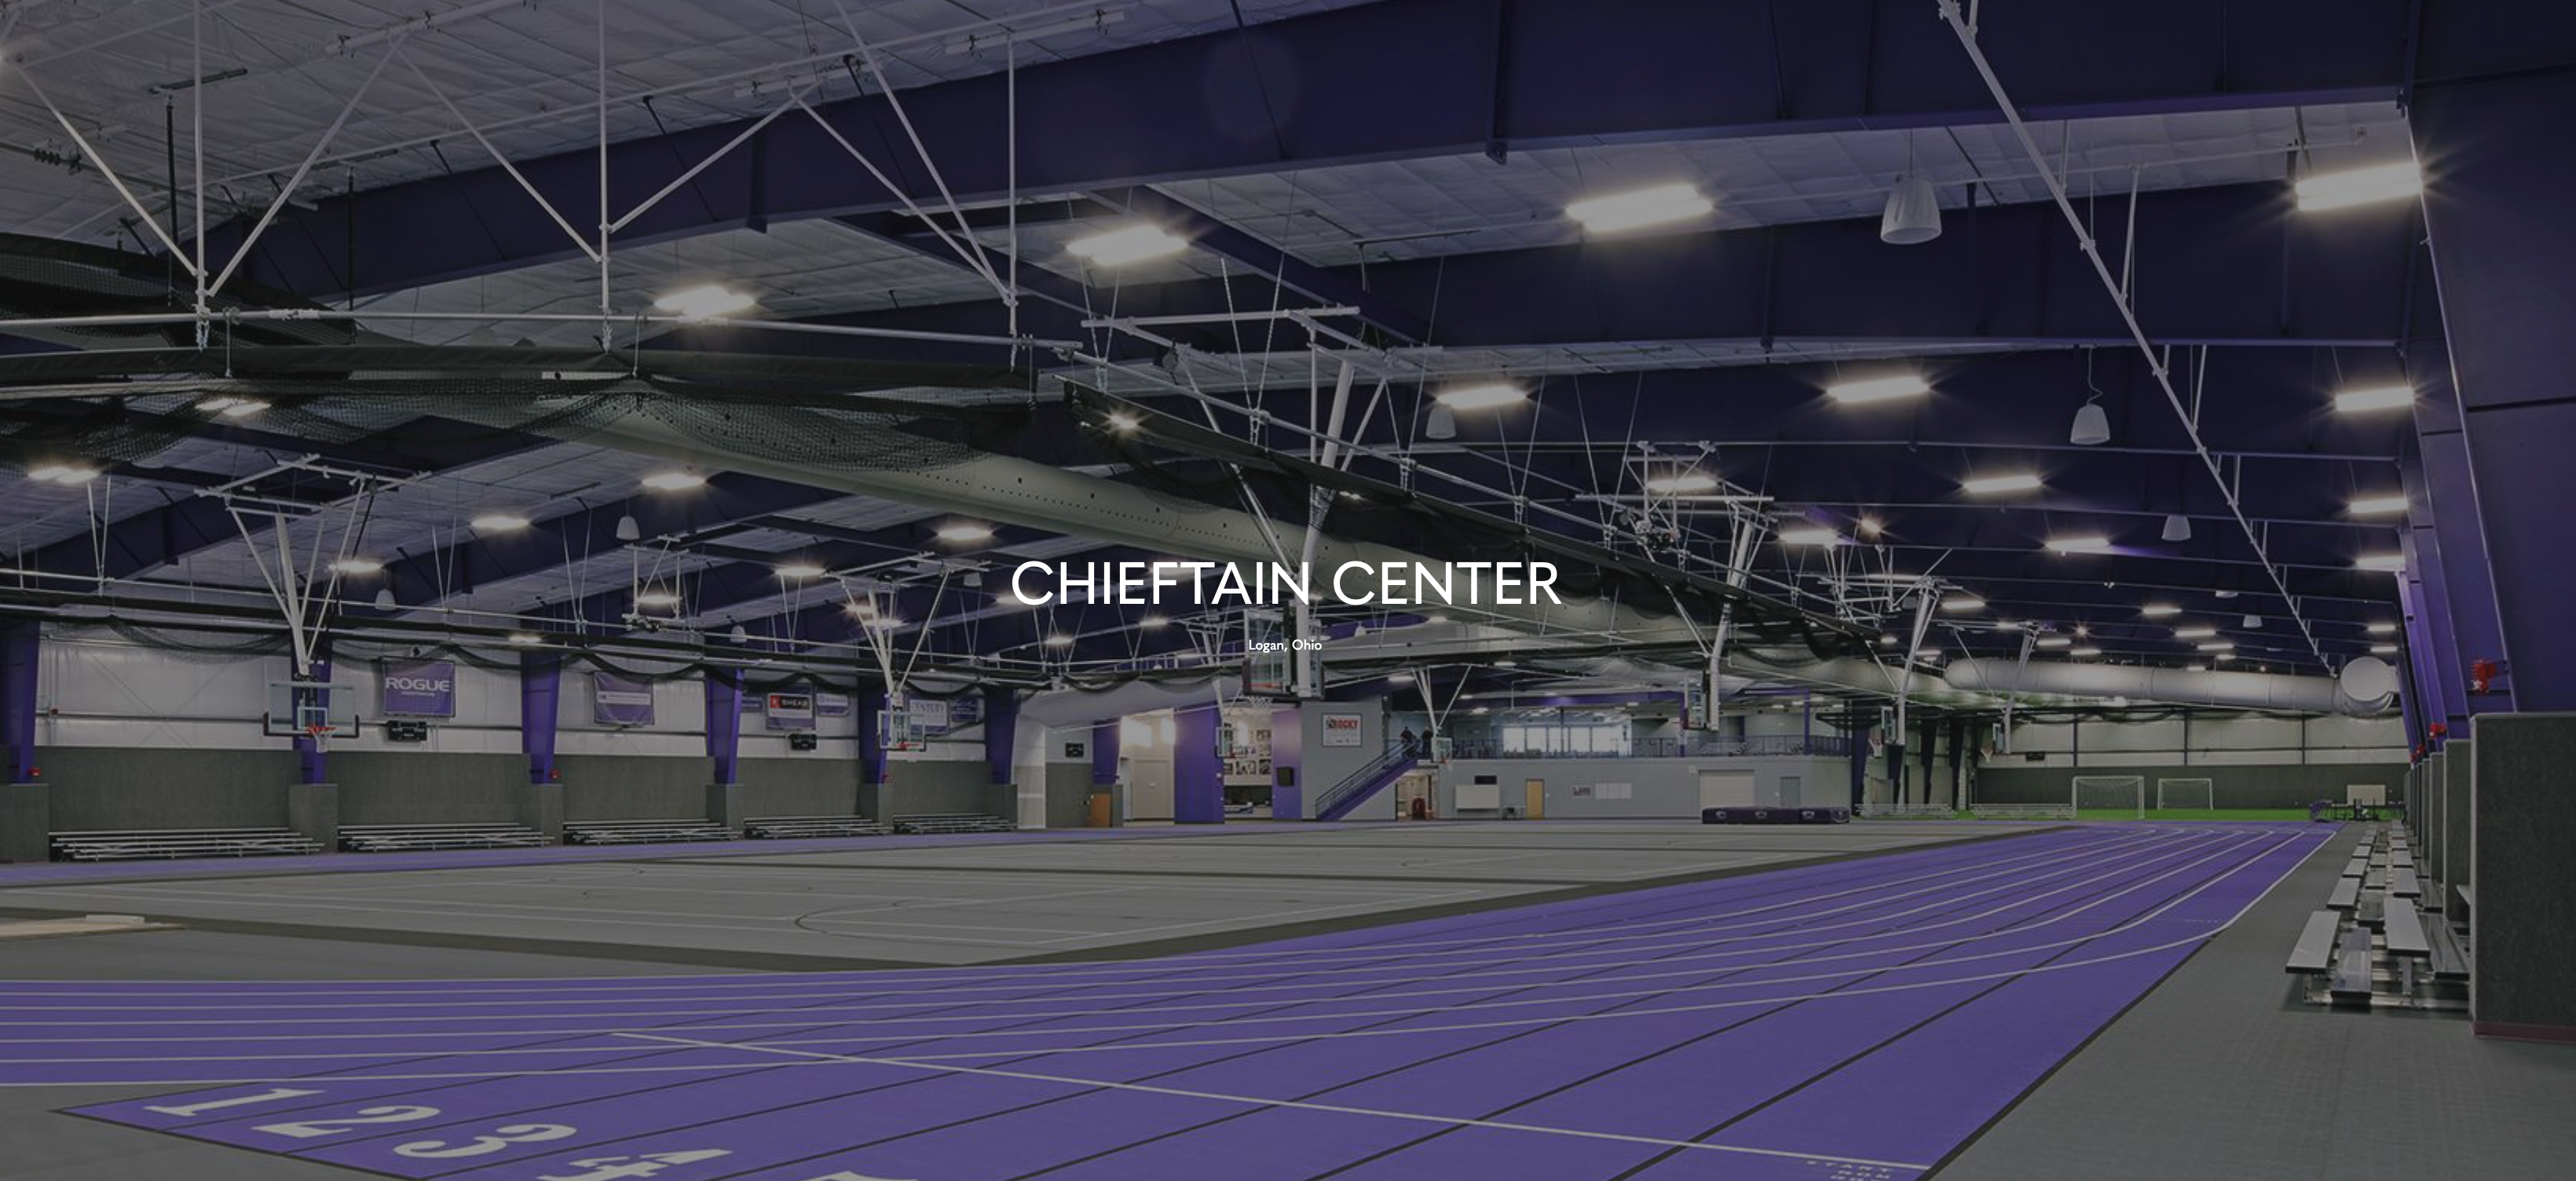 The Chieftain Center